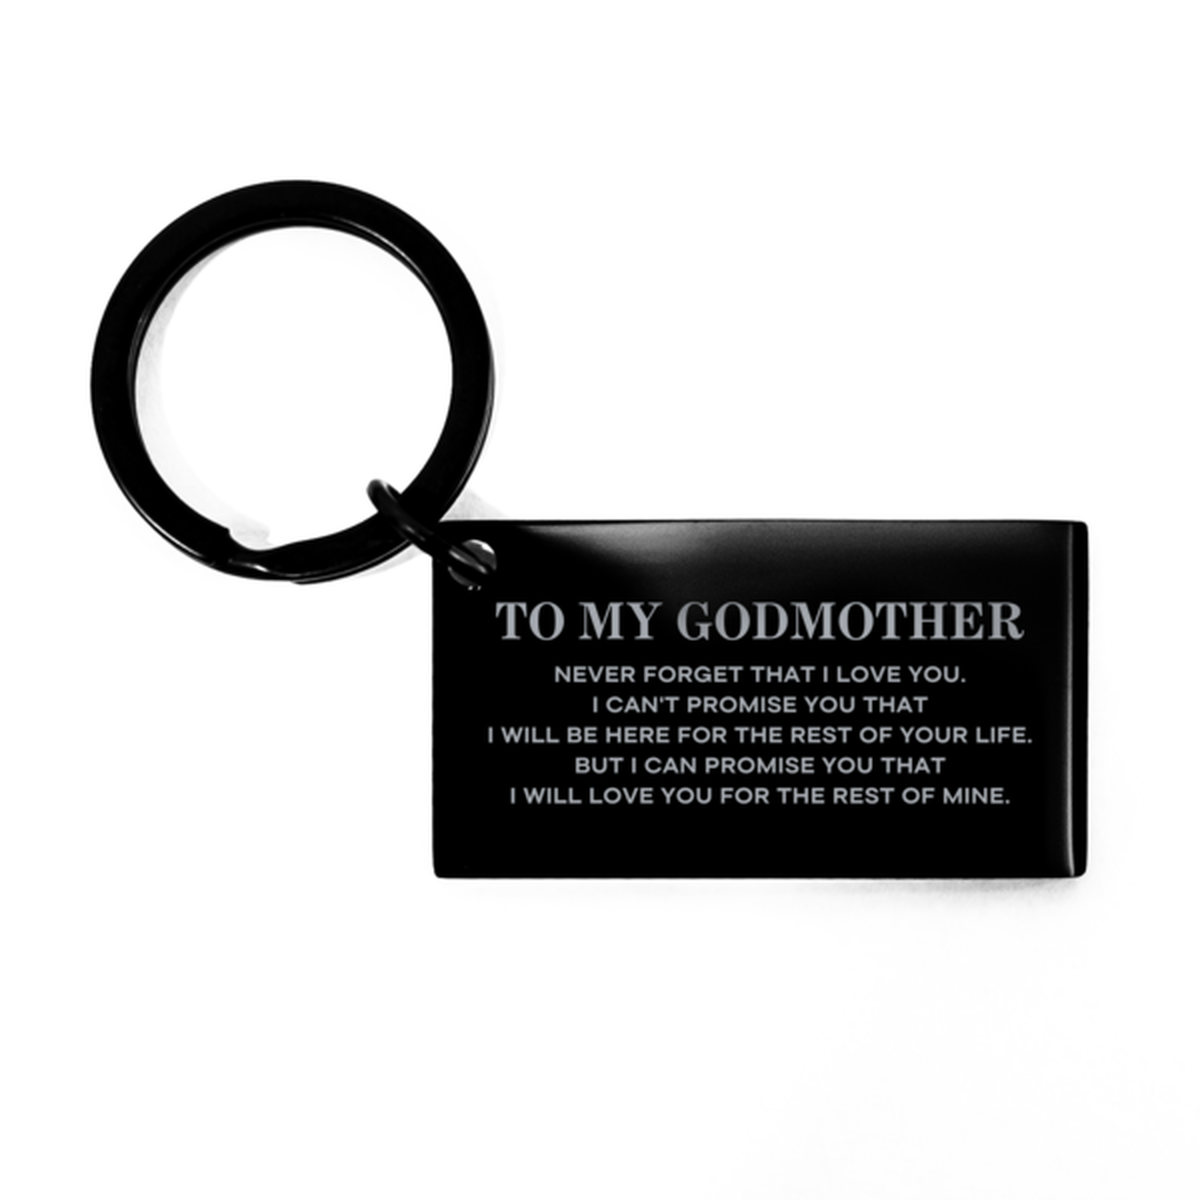 To My Godmother Gifts, I will love you for the rest of mine, Love Godmother Keychain, Birthday Christmas Unique Keychain For Godmother